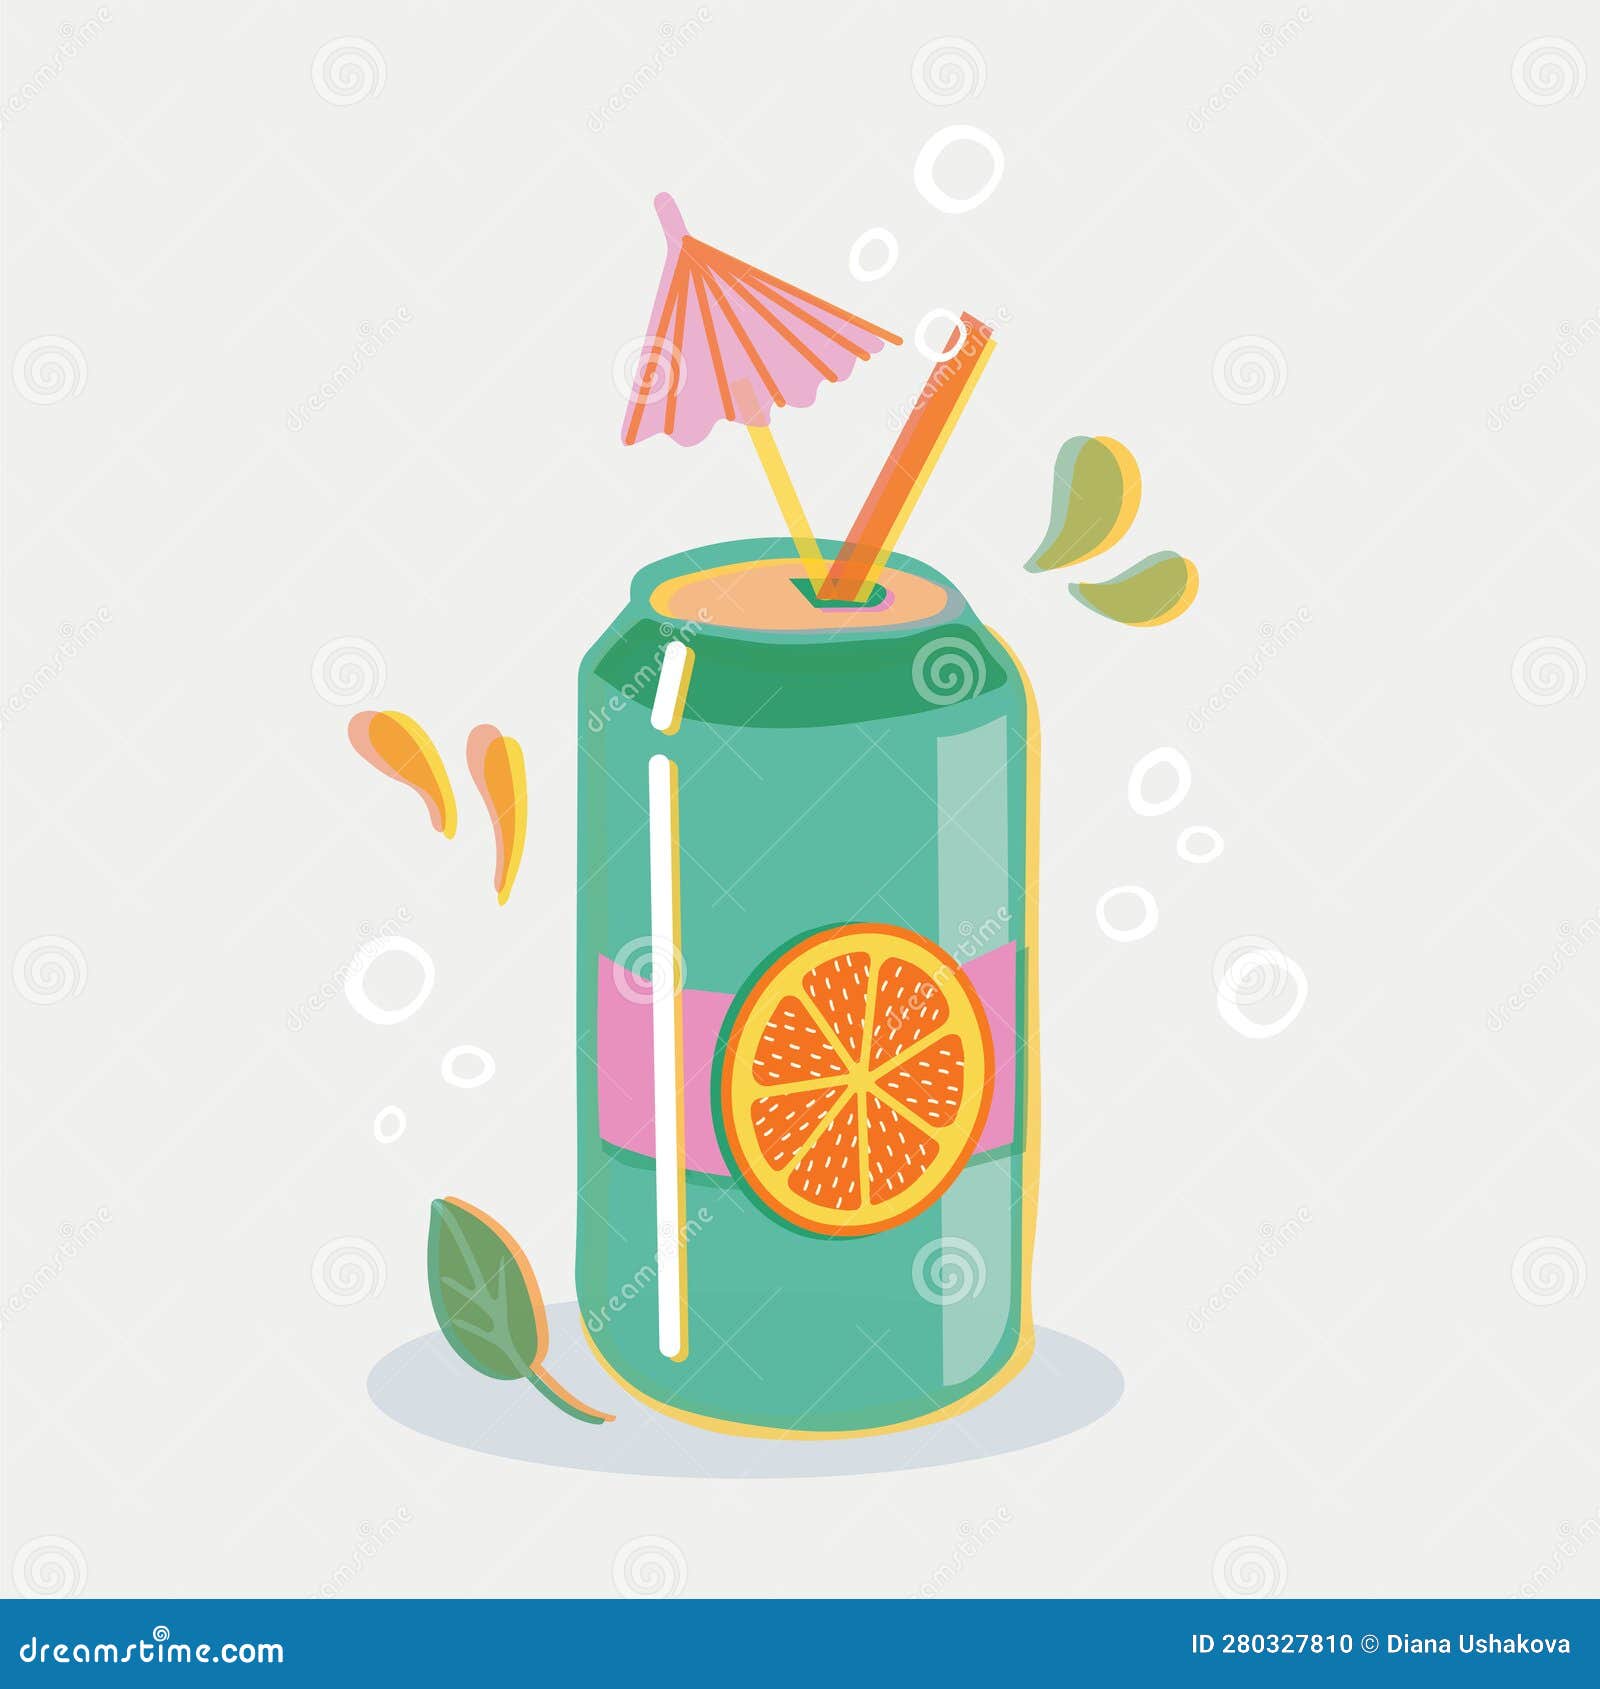 Can of Soda Vector Illustration in Risoprint Style Stock Vector ...